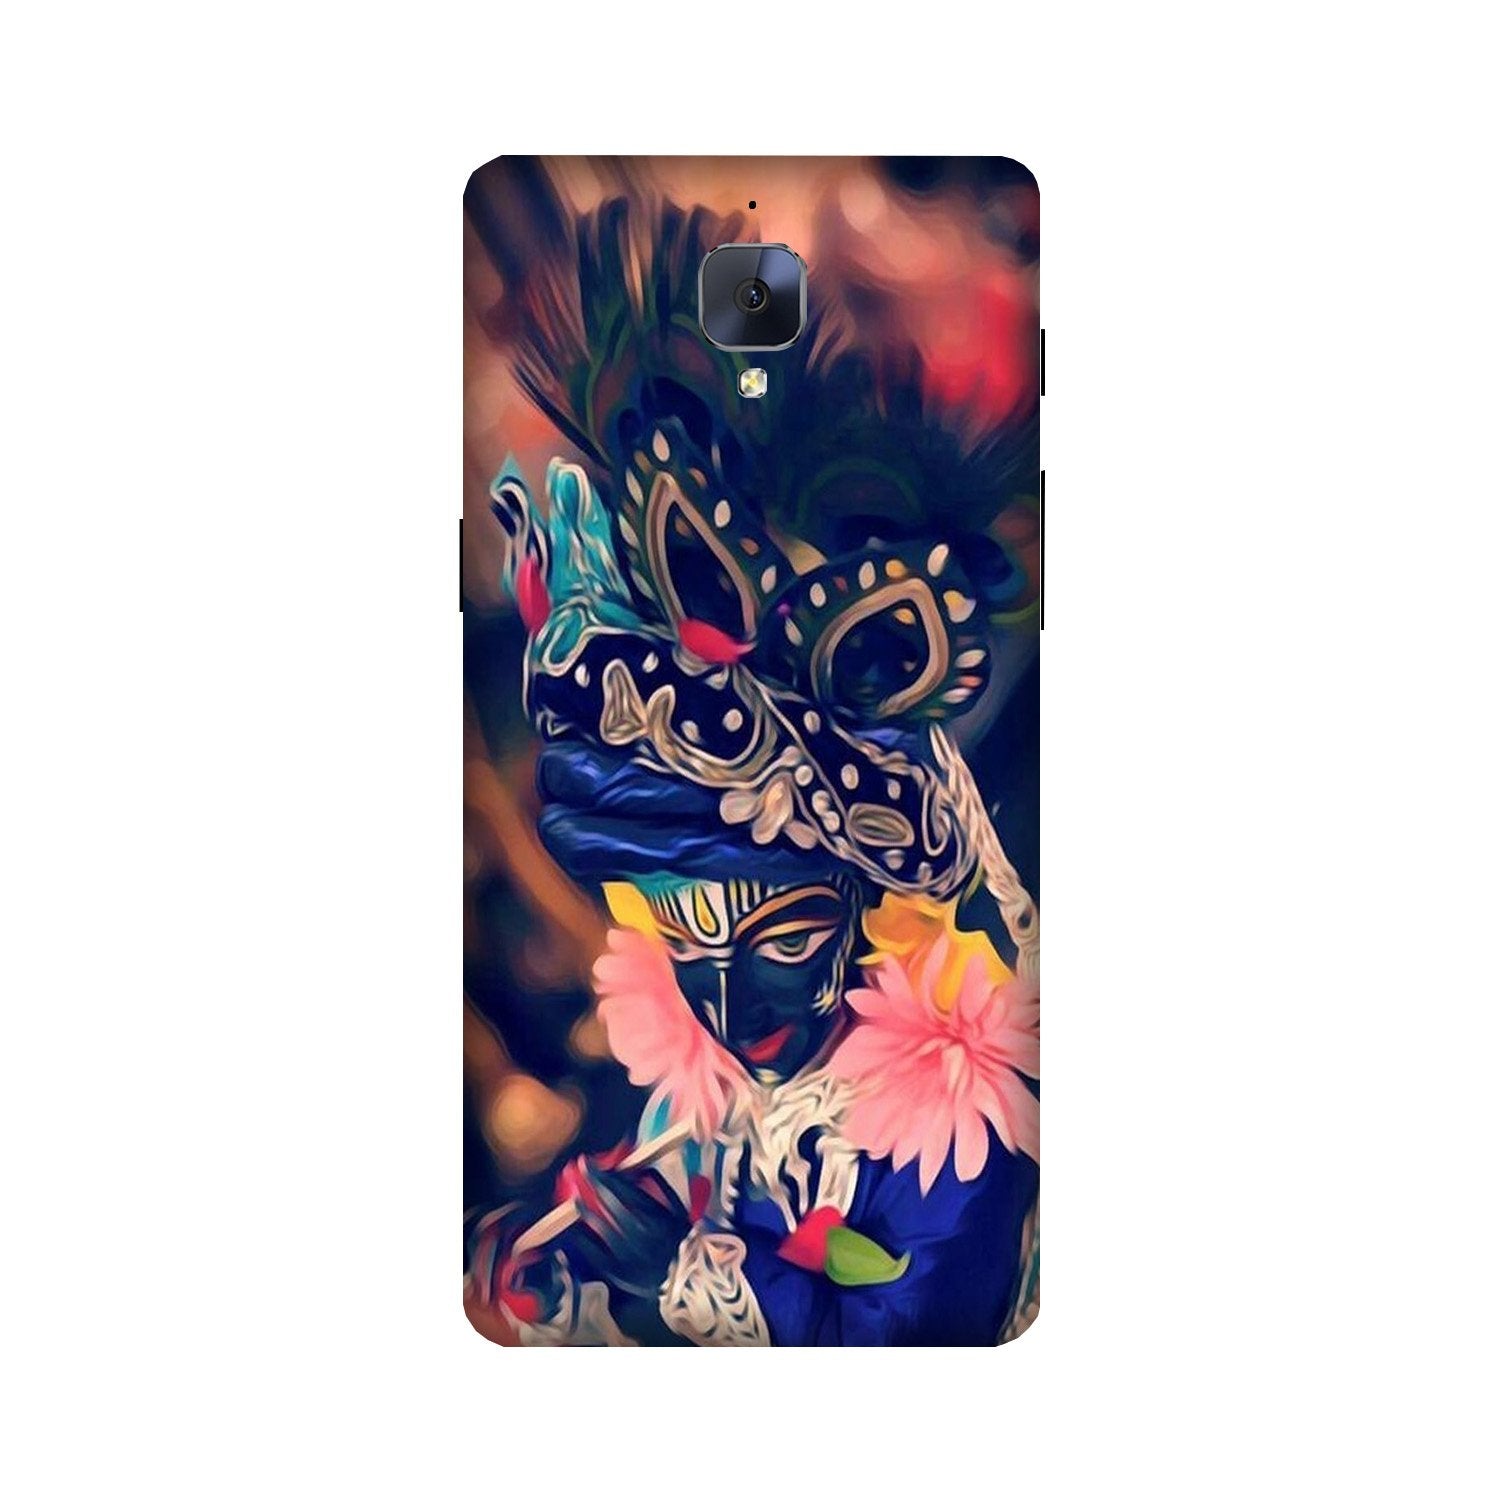 Lord Krishna Case for OnePlus 3/ 3T